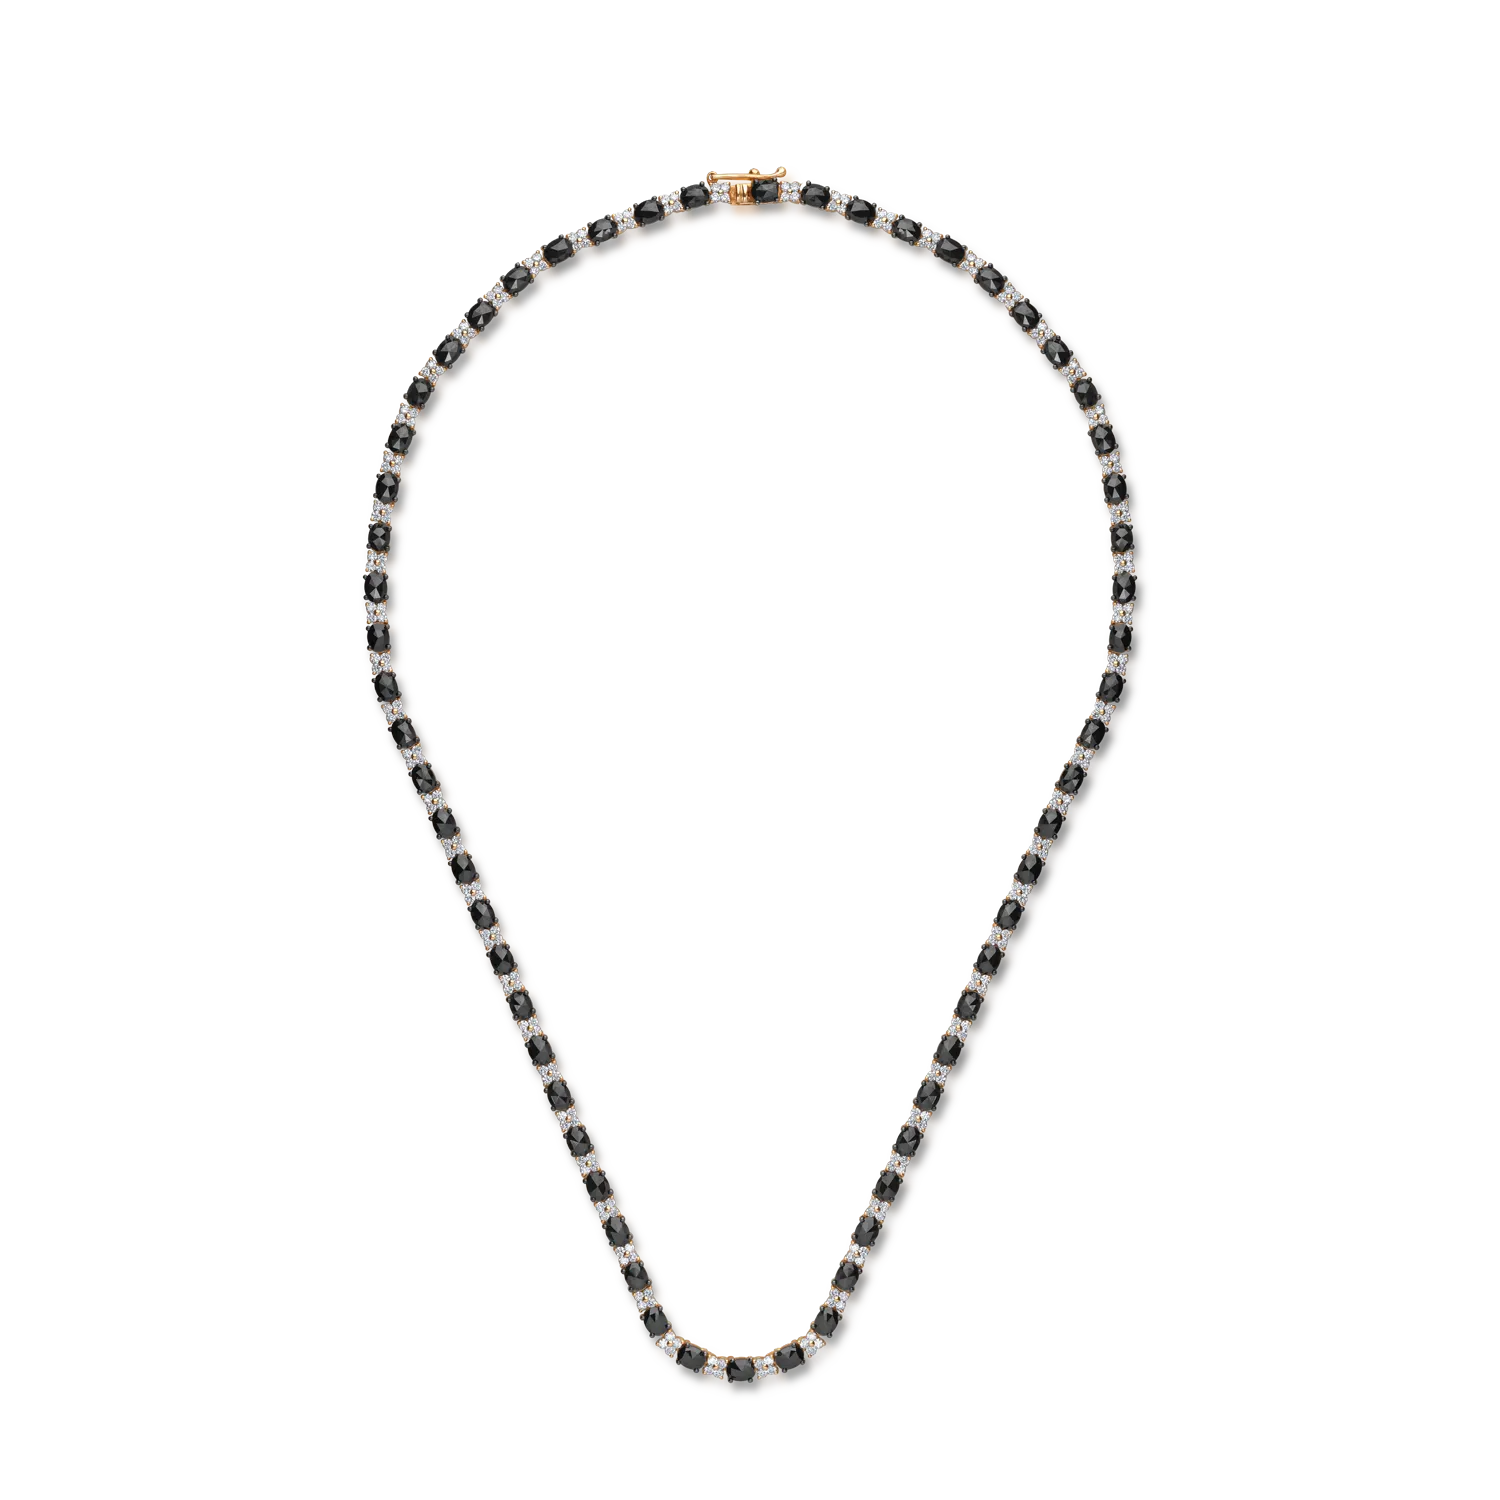 18K rose gold tennis necklace with 10.37ct black diamonds and 2.43ct clear diamonds